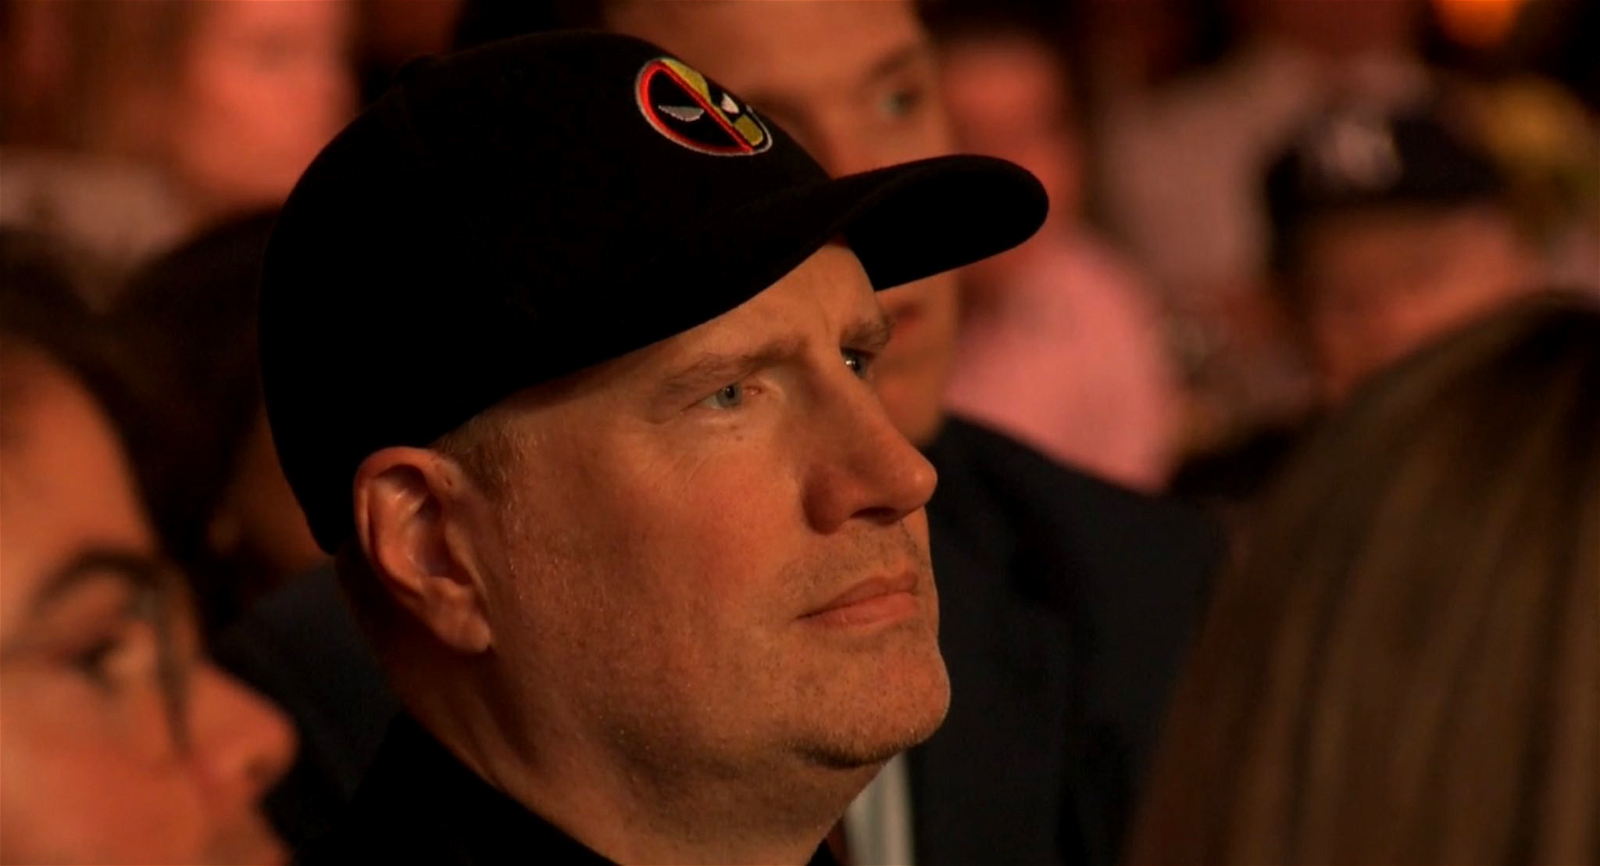 Kevin Feige wearing the viral Deadpool 3 hat at 51st Saturn Awards confirmed the costume rumor